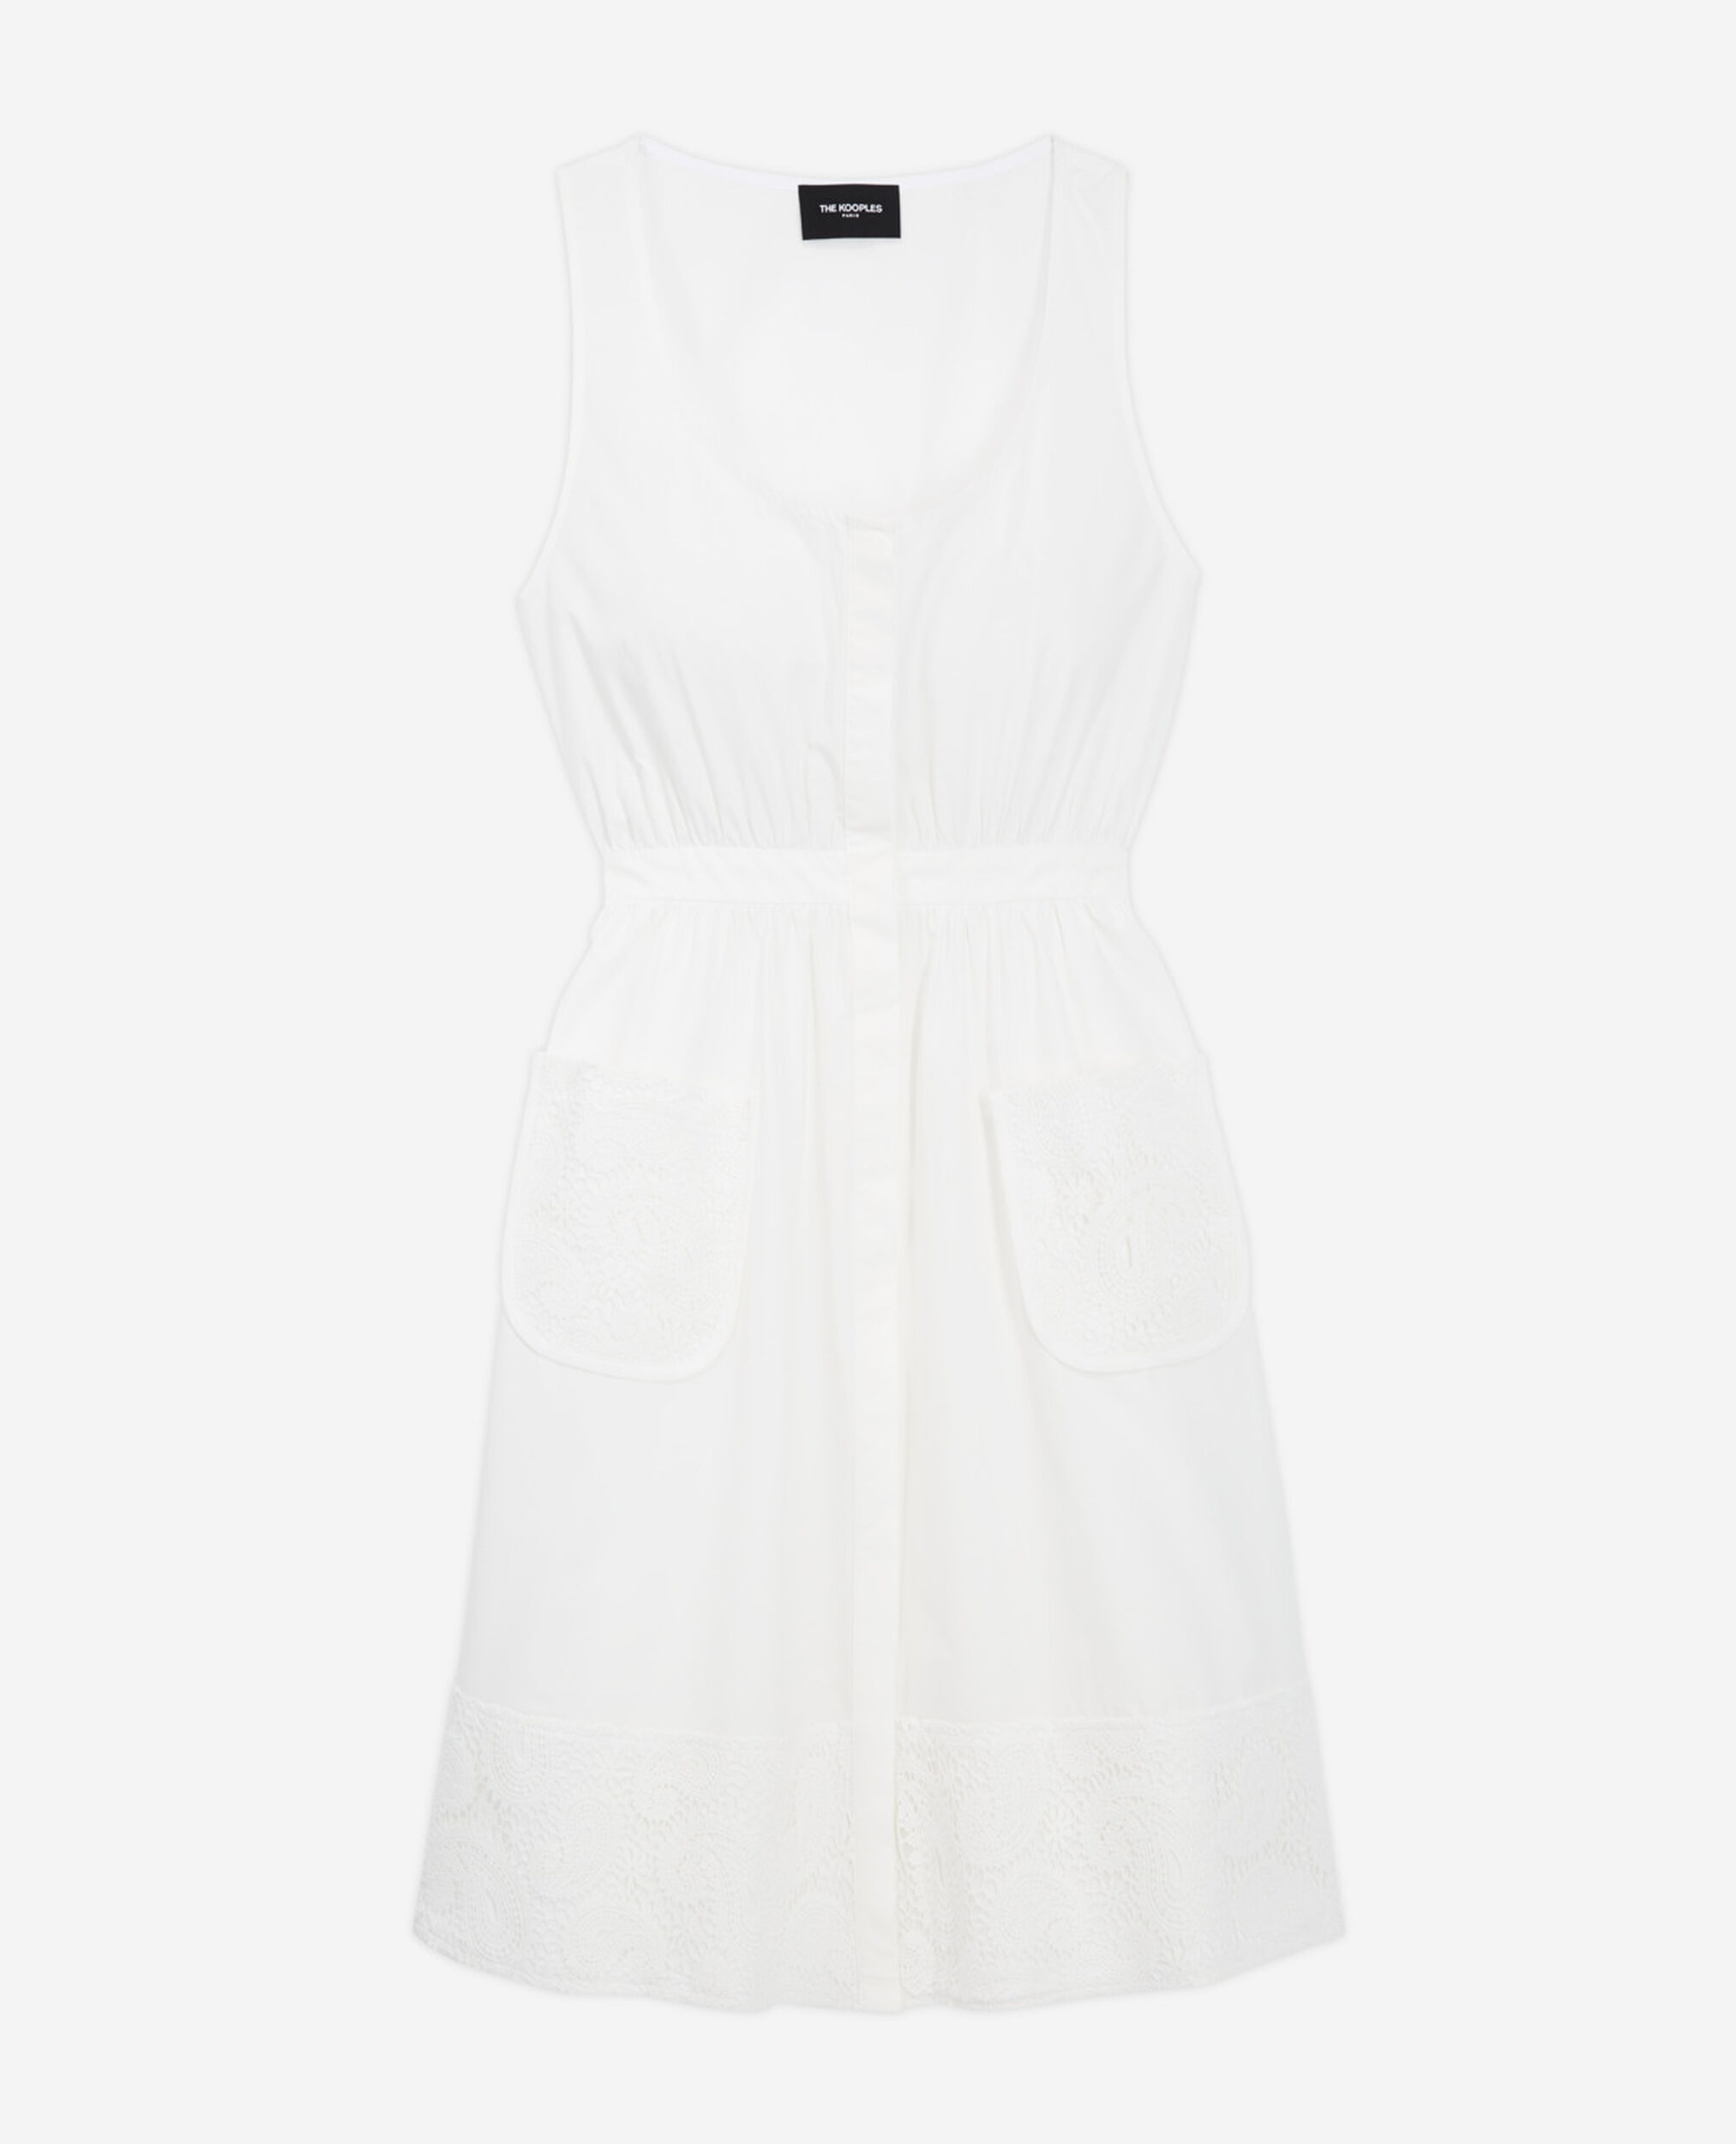 Robe courte blanche sans manches poches, WHITE, hi-res image number null